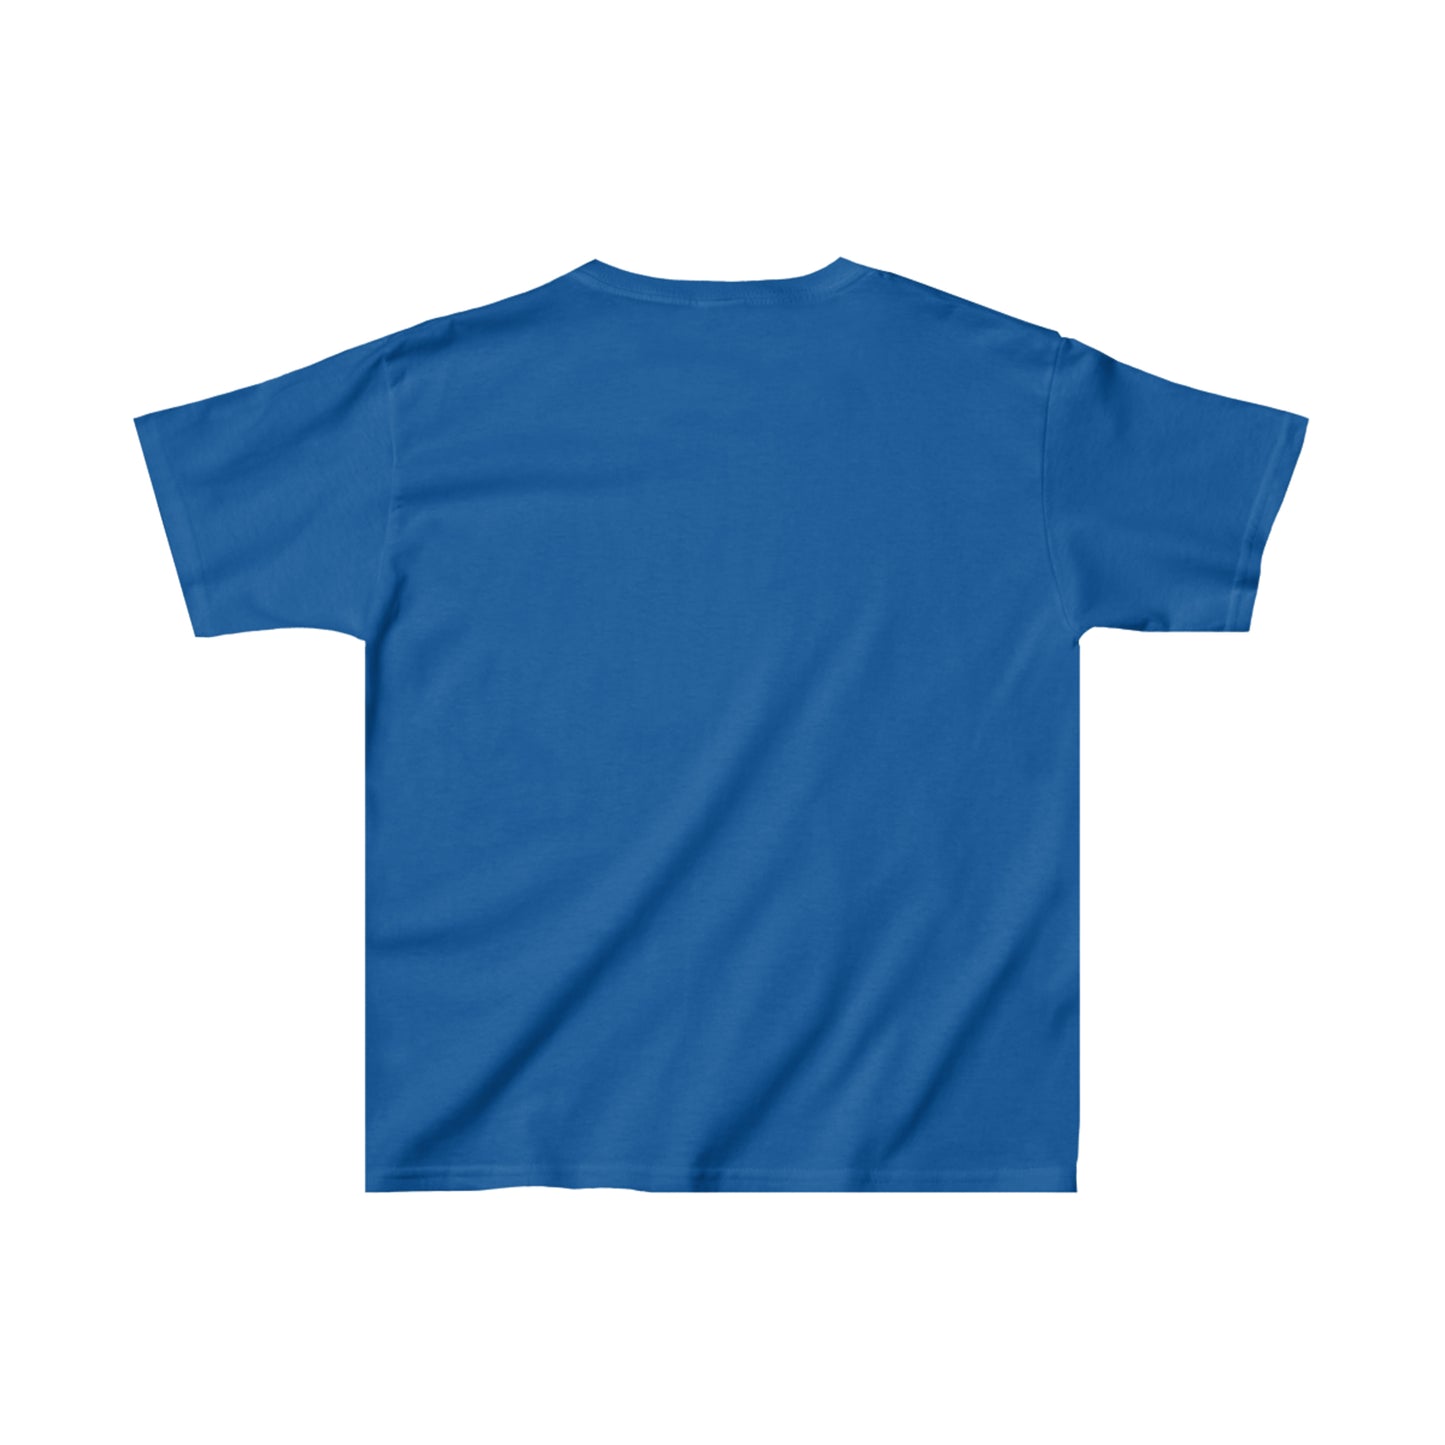 Kids Airplane t-shirt | Heavy Cotton™ Tee for kids | Patcasso